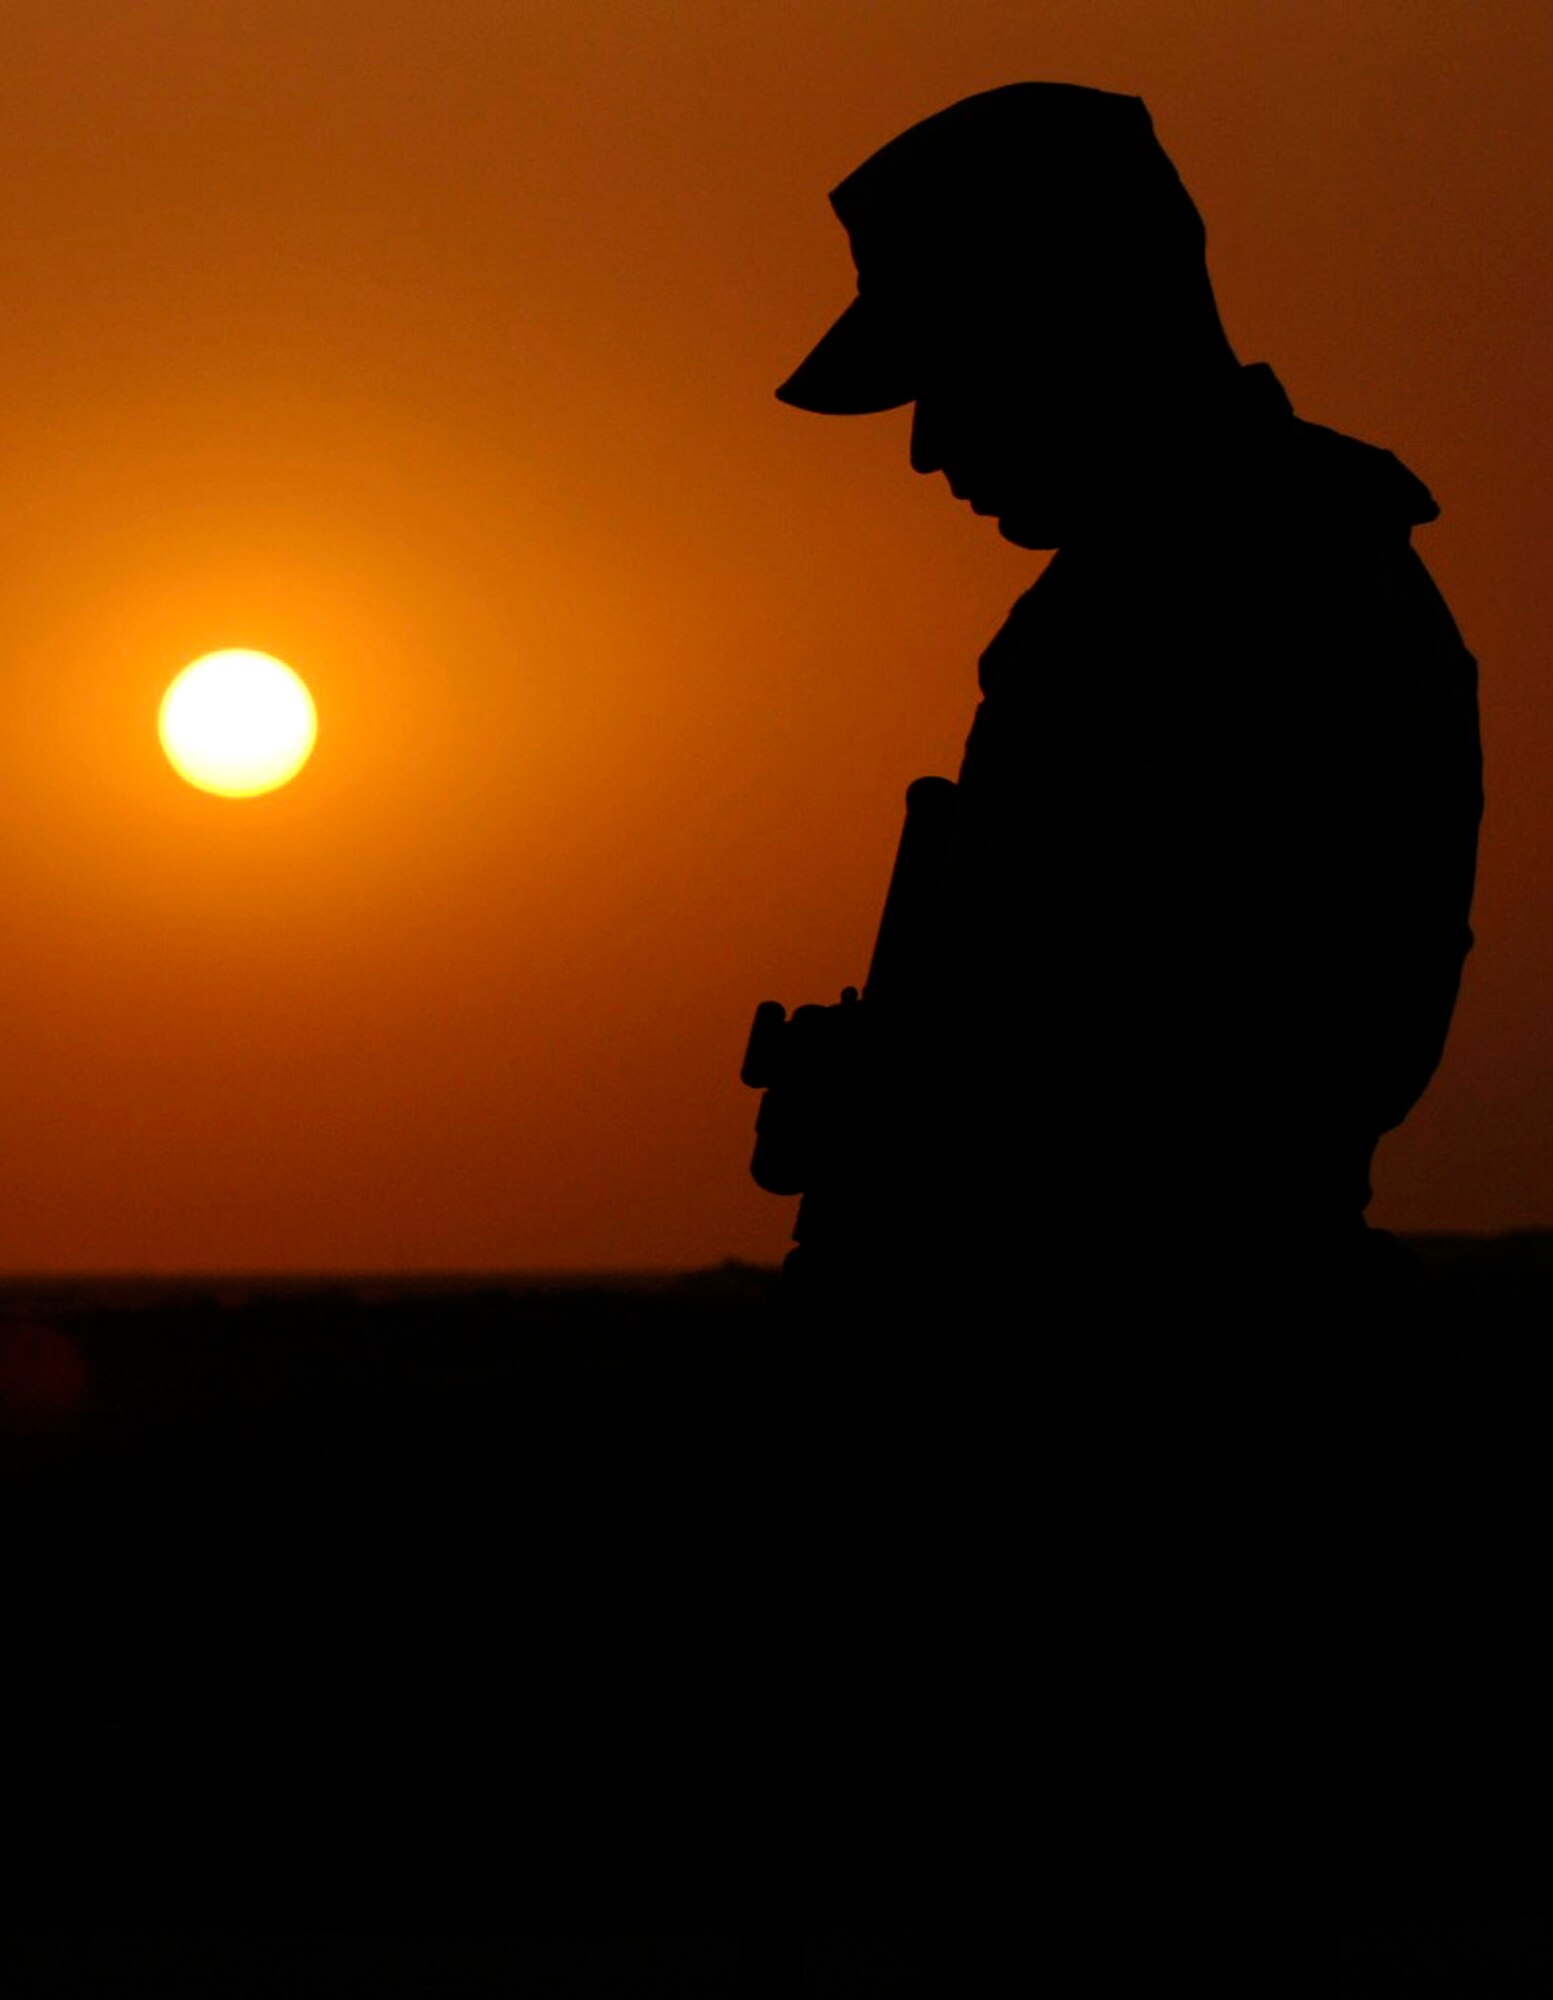 Senior Airman Dwayne Solis stands watch over the Ali Air Base, Iraq, flightline as the sun begins to set June 22. Airman Solis, a member of the 407th Expeditionary Security Forces Squadron, is assigned to flightline defense, protecting U.S. and coalition assets from insurgent intelligence gathering efforts and attacks. (U.S. Air Force photo/Master Sgt. Robert W. Valenca)